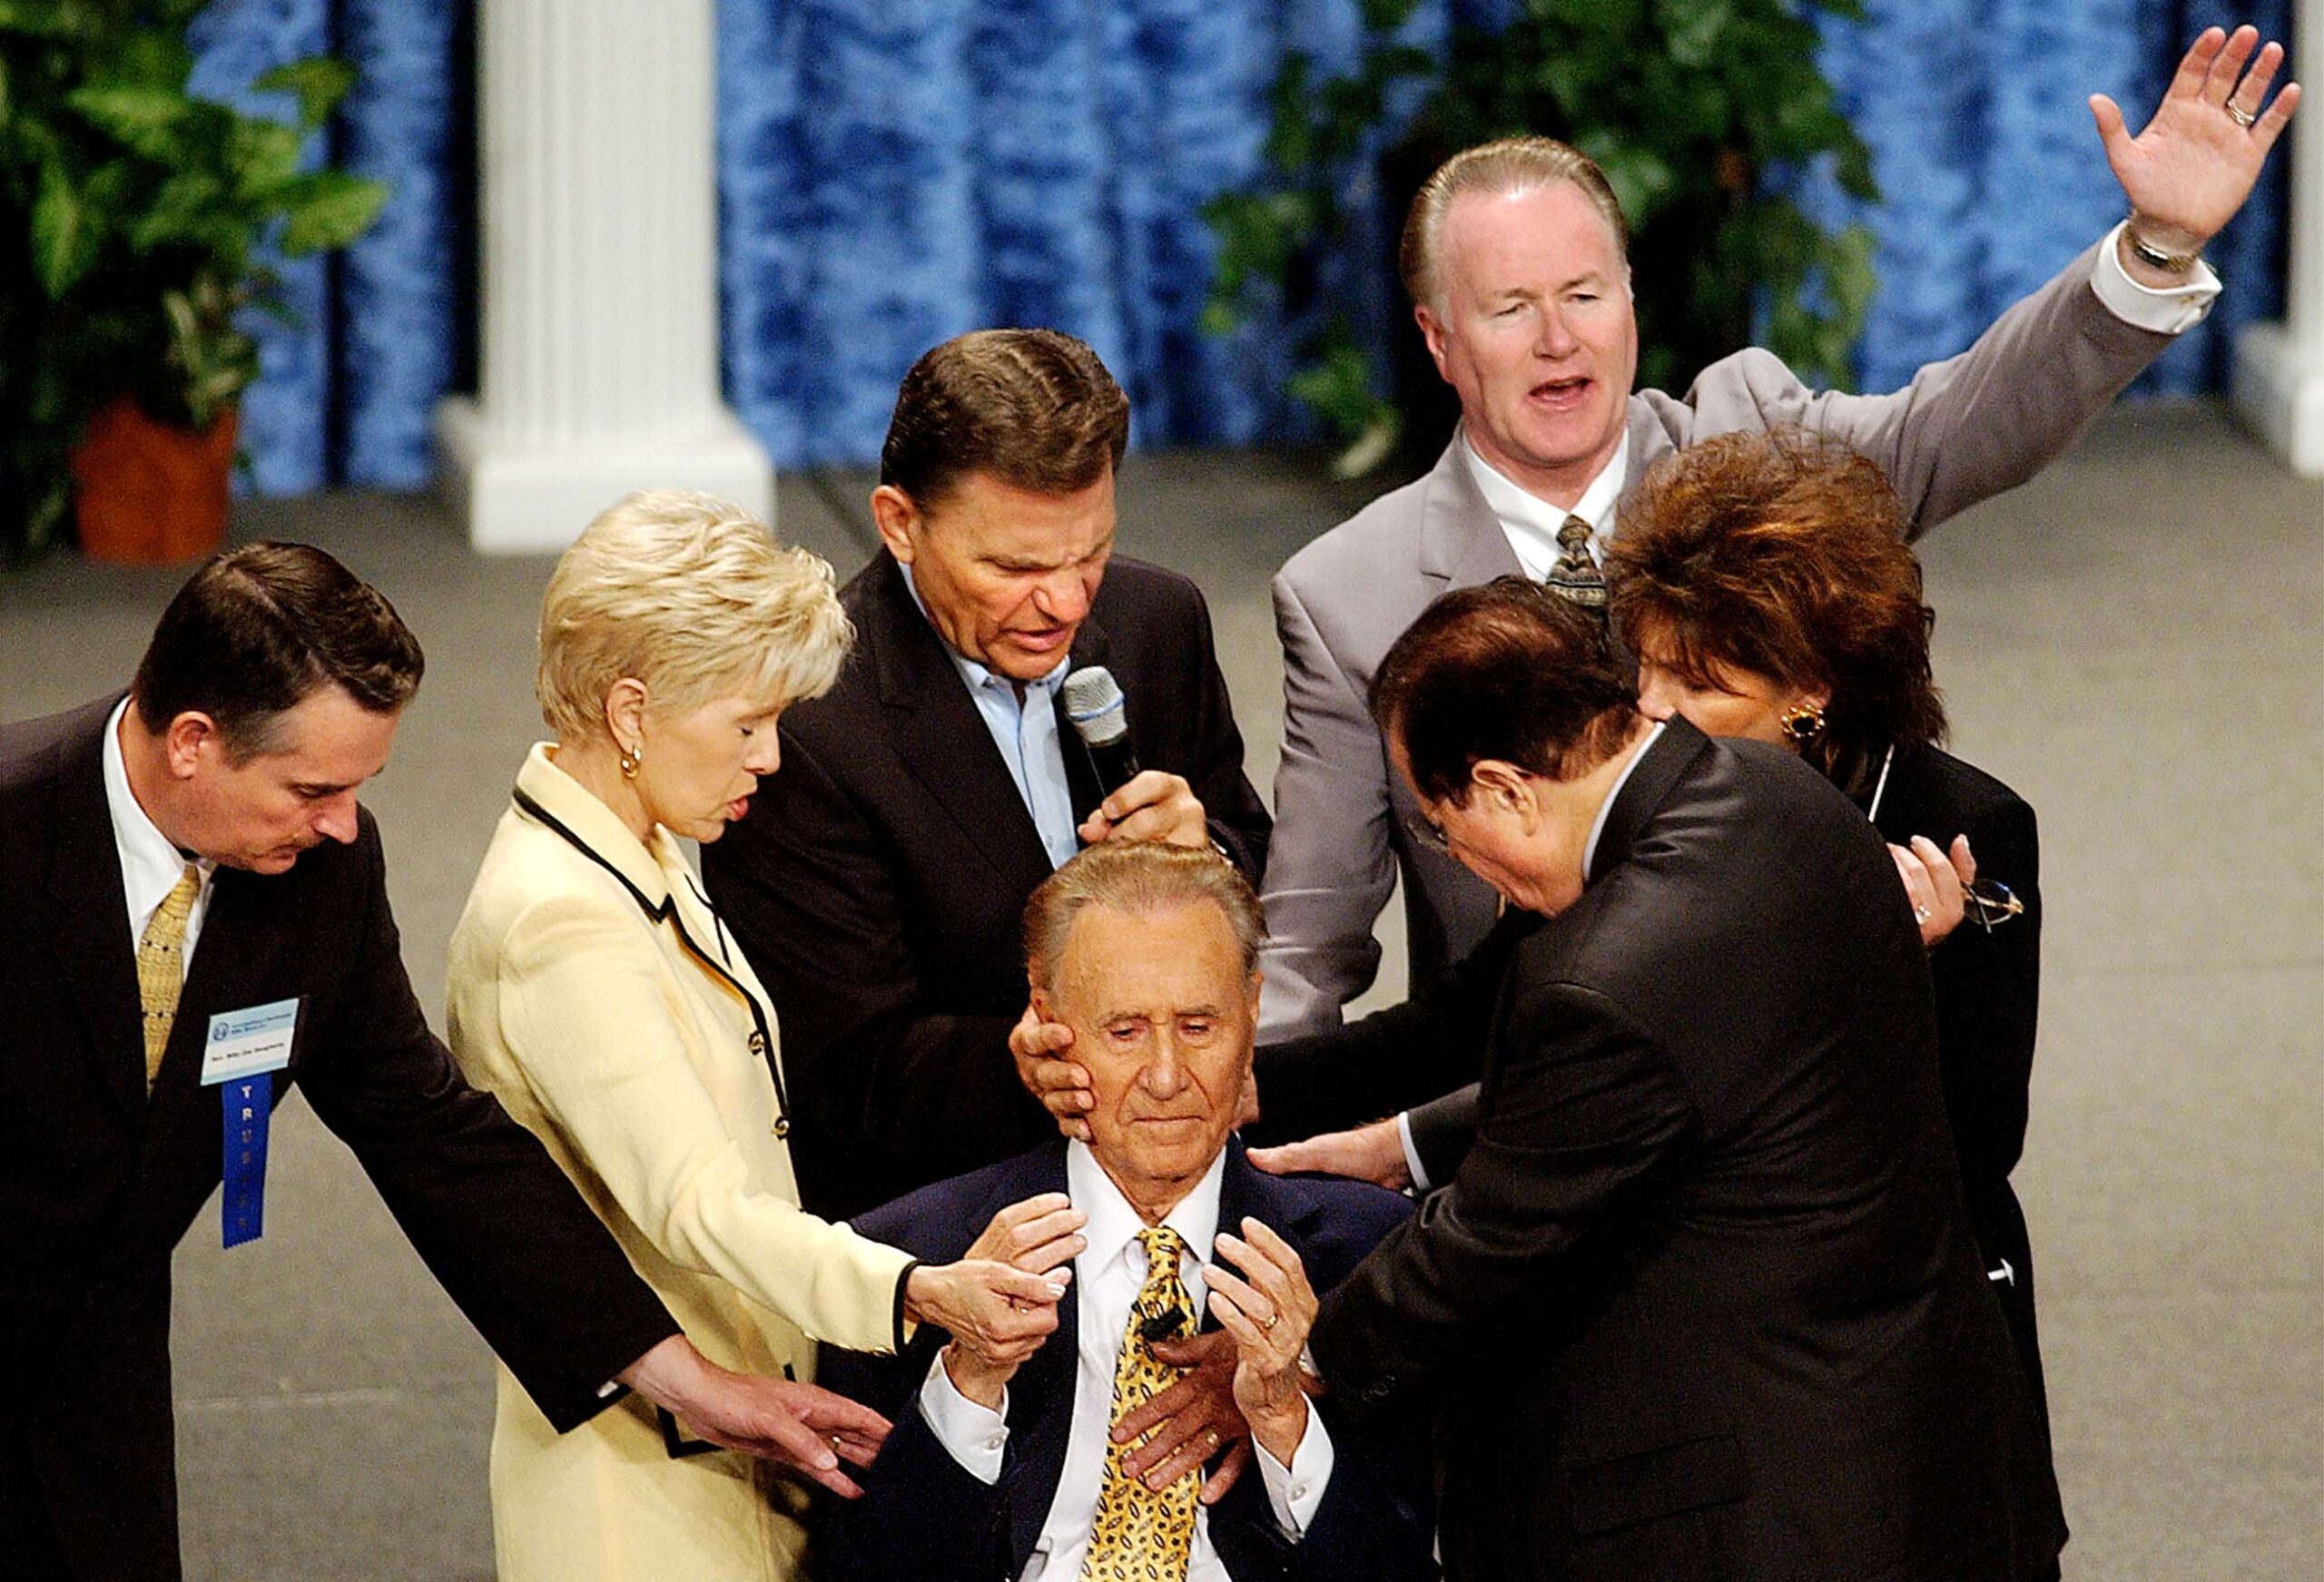 Televangelists lay hands on Oral Roberts, 85, during the International Charismatic Bible Ministries conference in the Mabee Center at Oral Roberts University in Tulsa, Oklahoma, in 2003. From left are, Billy Joe Daugherty; Gloria Copeland; Kenneth Copeland; Charles Green; Richard Roberts; and Lindsay Roberts.